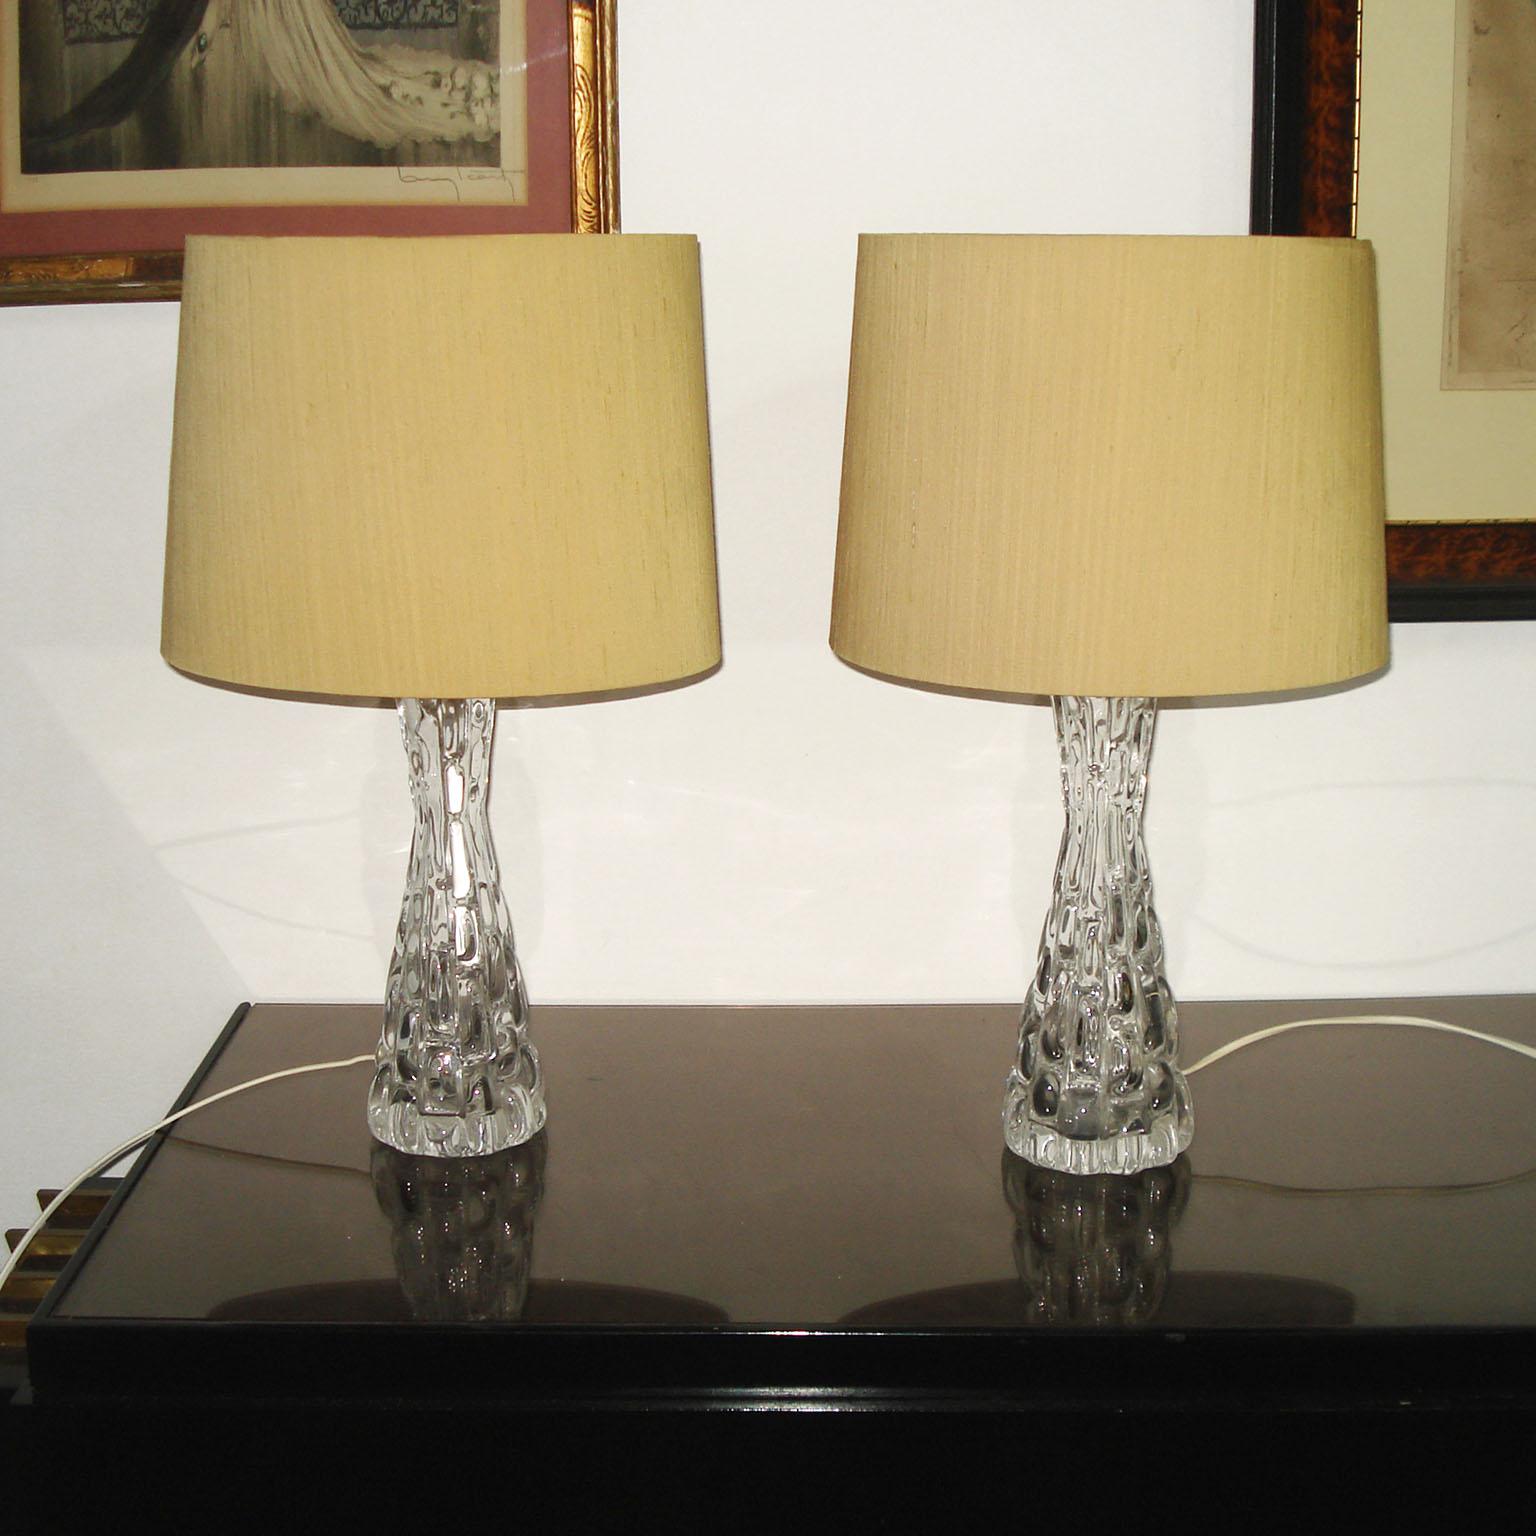 Exceptional pair of thick relief heavy crystal table lamps with polished nickel hardware by Orrefors. Signed under the bottom. Signed on the nickel top finial, 